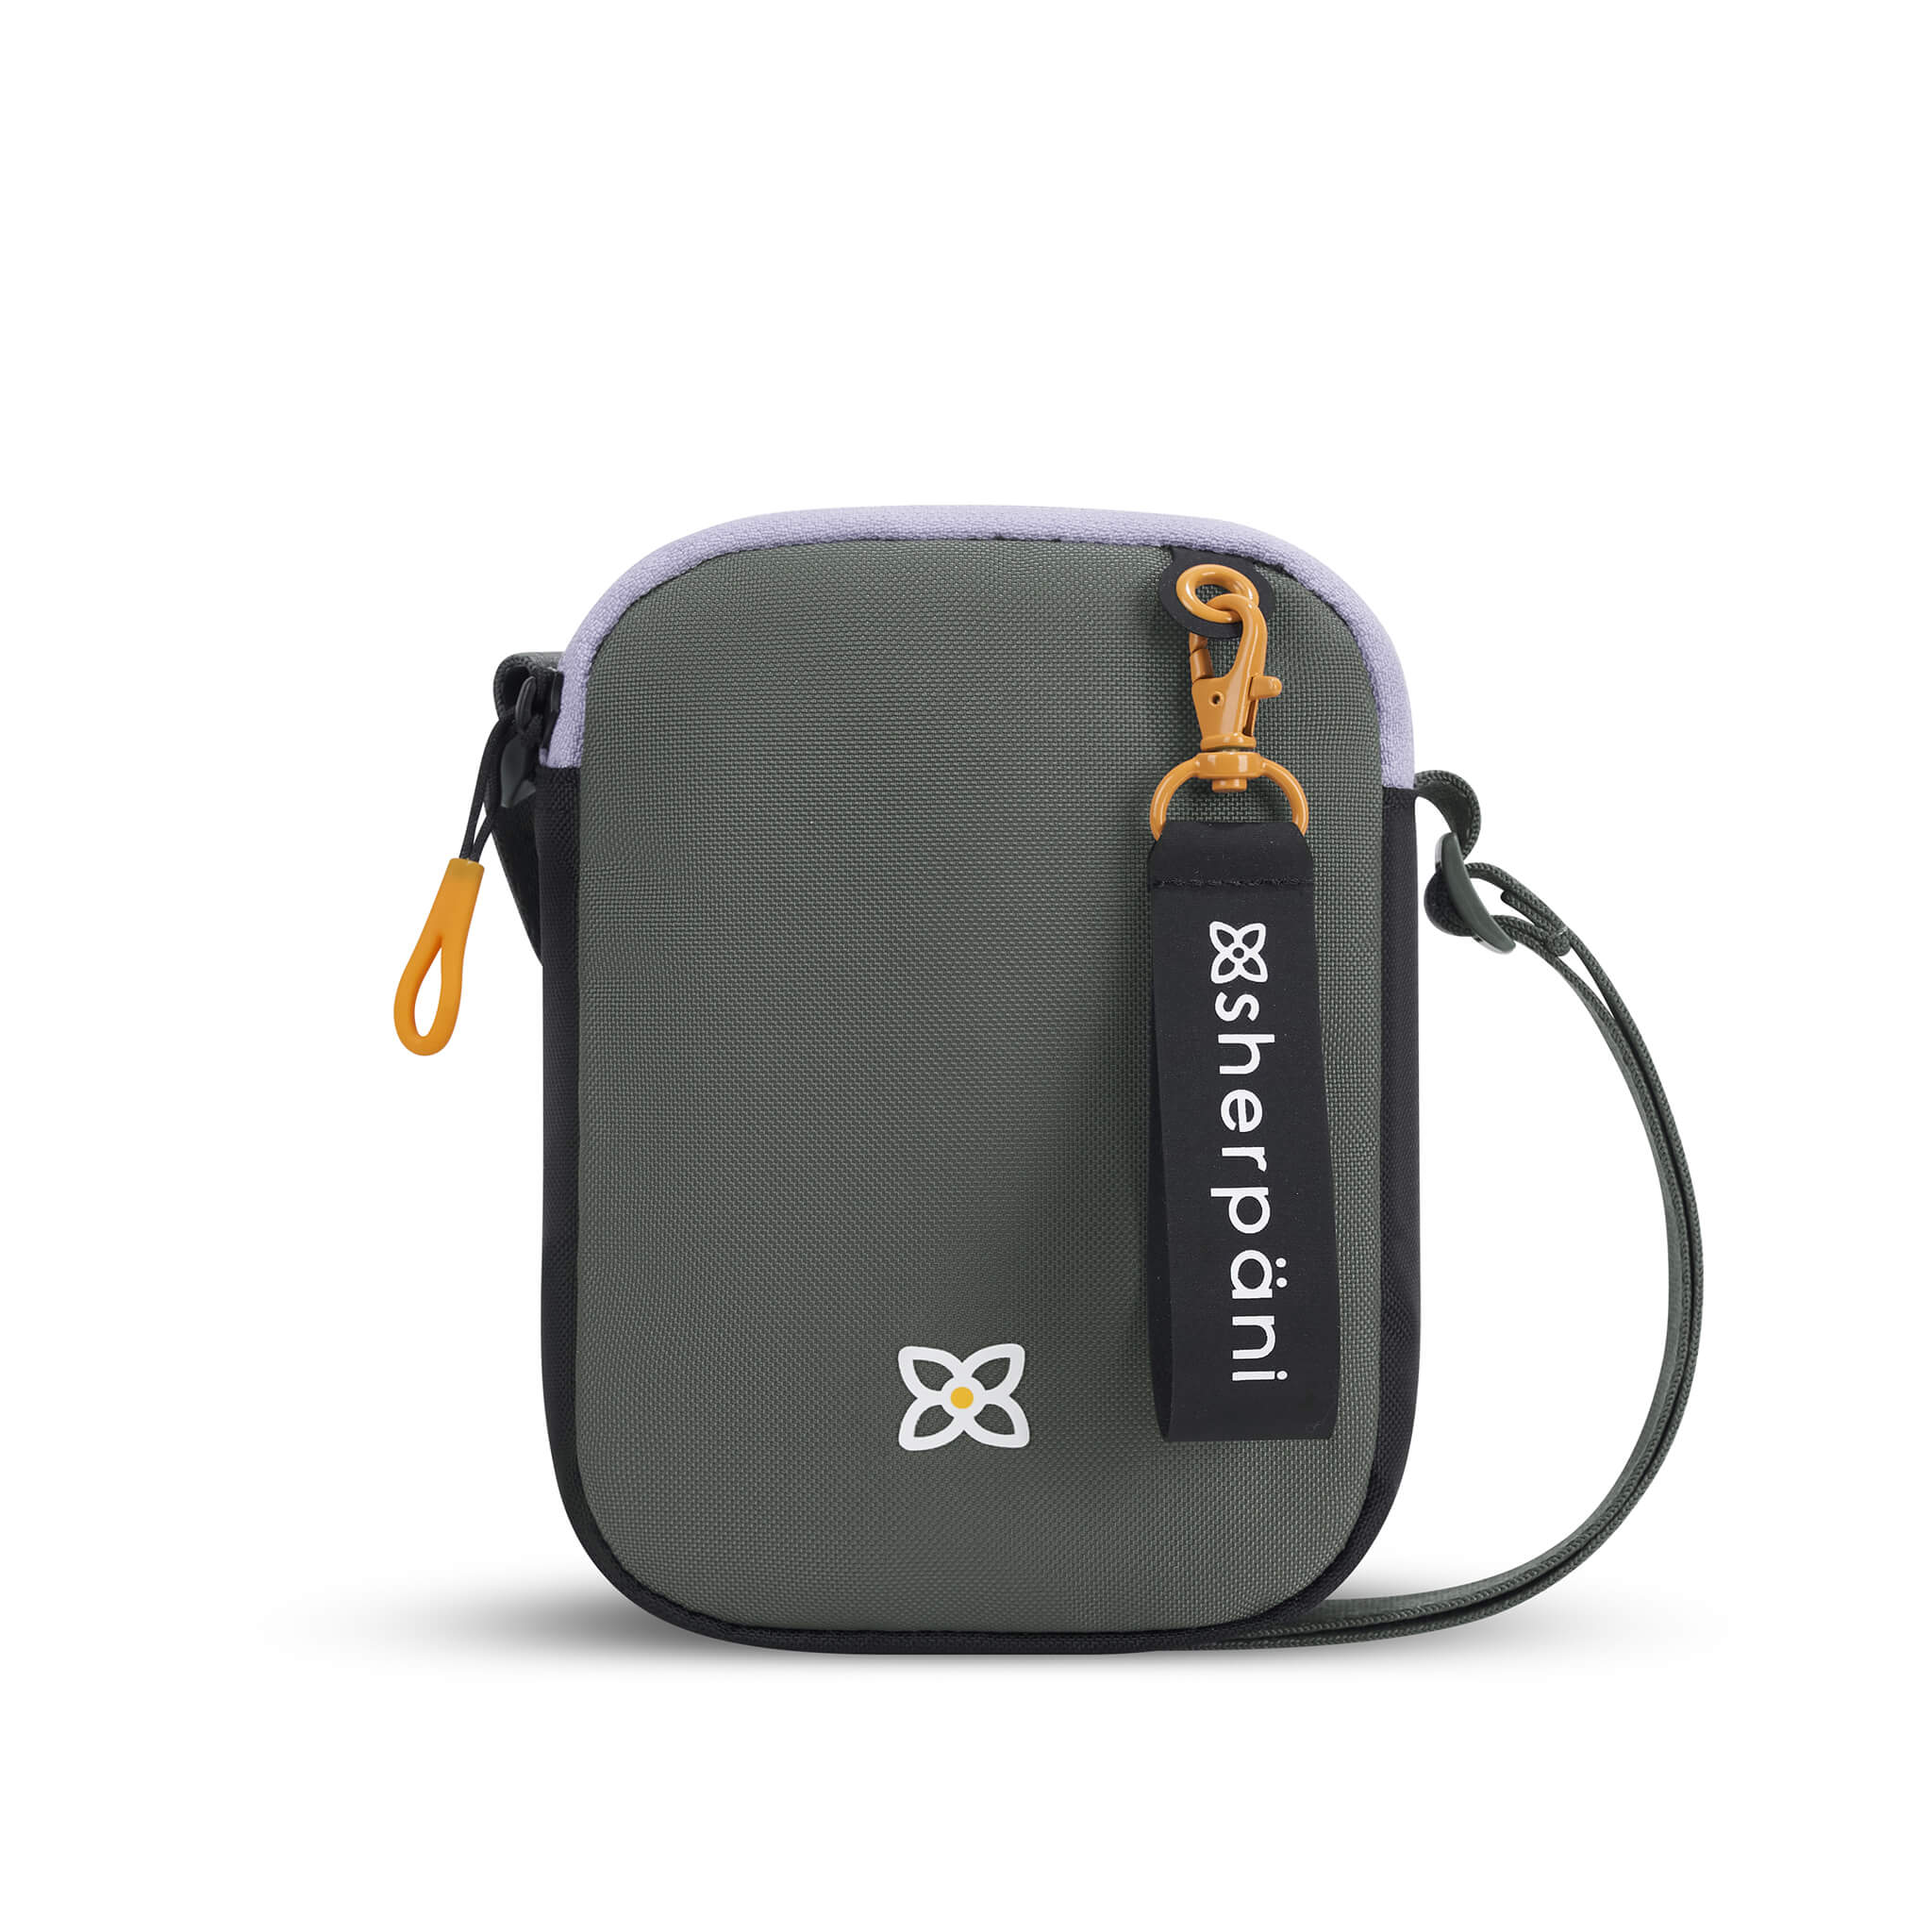 Flat front view of Sherpani mini crossbody purse, the Rogue in Juniper. Rogue features include an adjustable crossbody strap, detachable keychain, compact design, minimalist bag, RFID protection and back slip pocket. The Juniper color is two-toned in black and gray with yellow accents. 